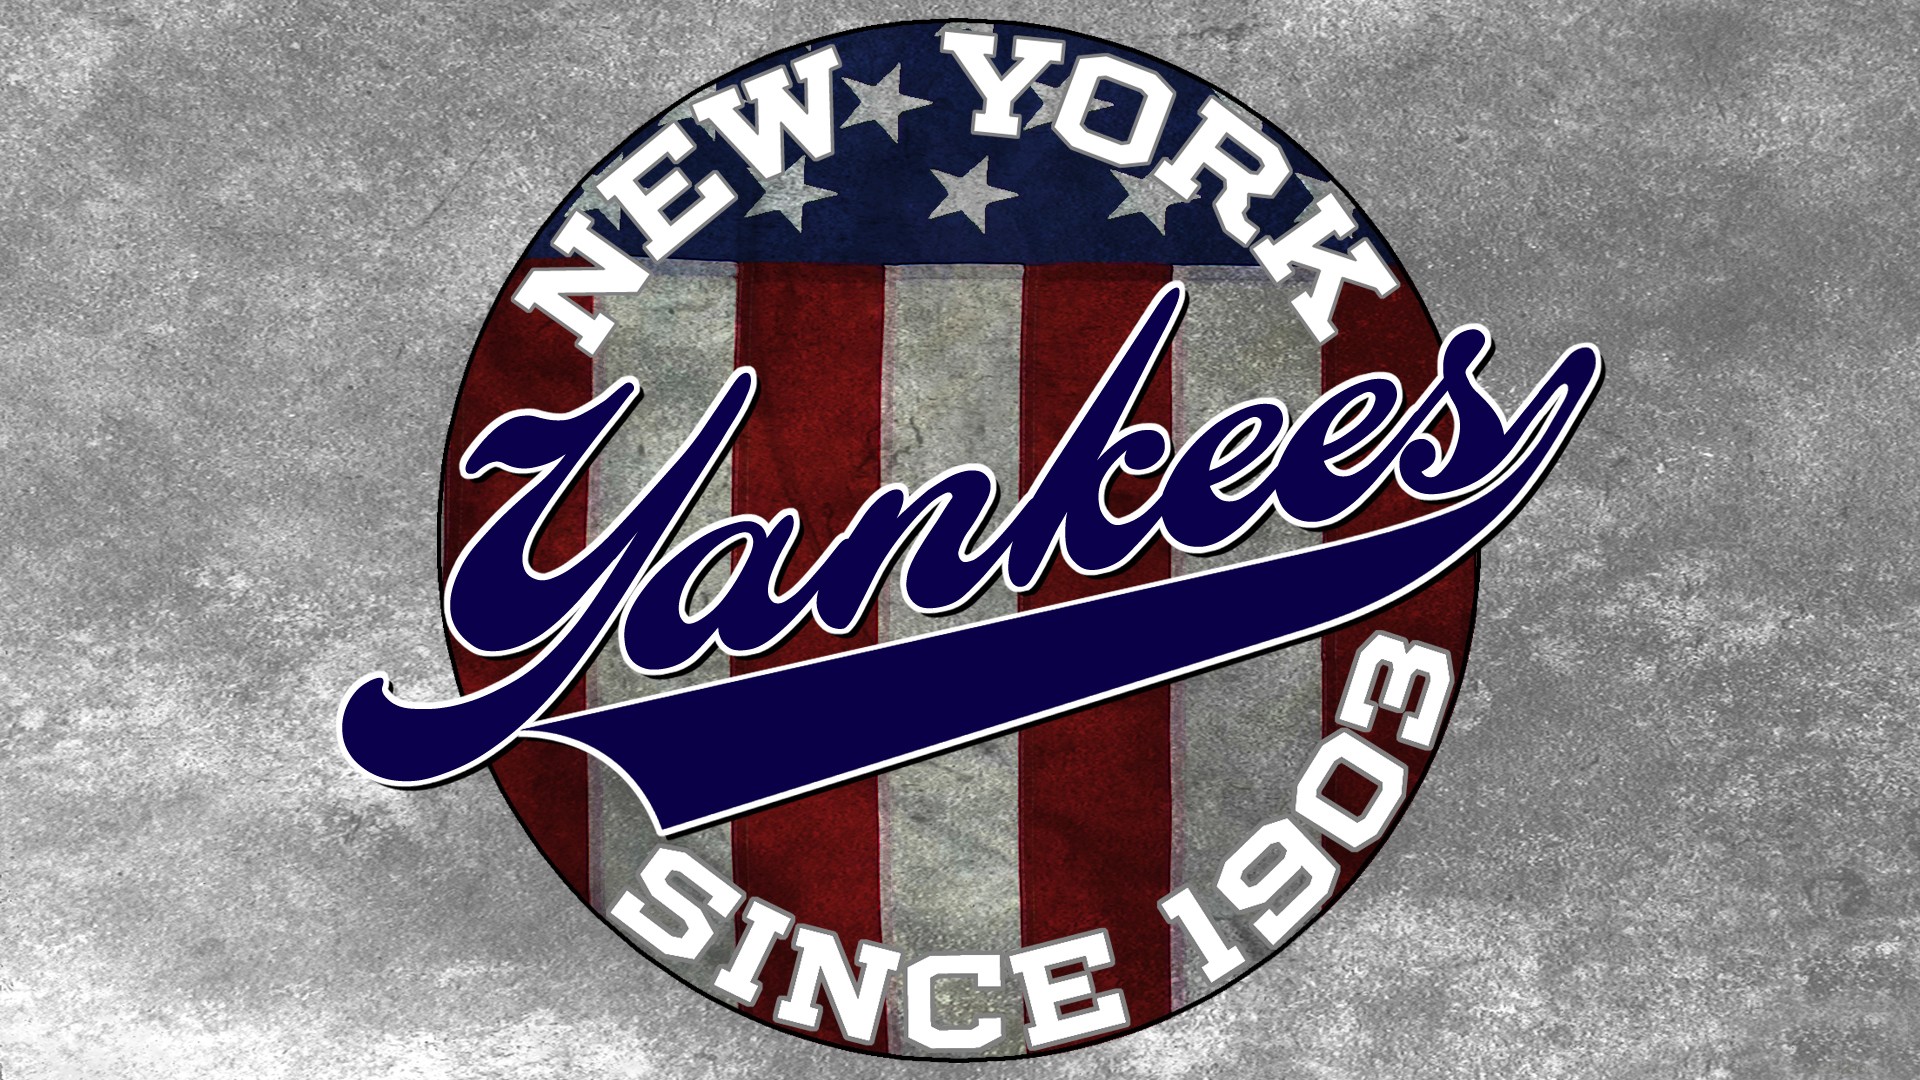 New York Yankees For Desktop Wallpaper with high-resolution 1920x1080 pixel. You can use this wallpaper for Mac Desktop Wallpaper, Laptop Screensavers, Android Wallpapers, Tablet or iPhone Home Screen and another mobile phone device